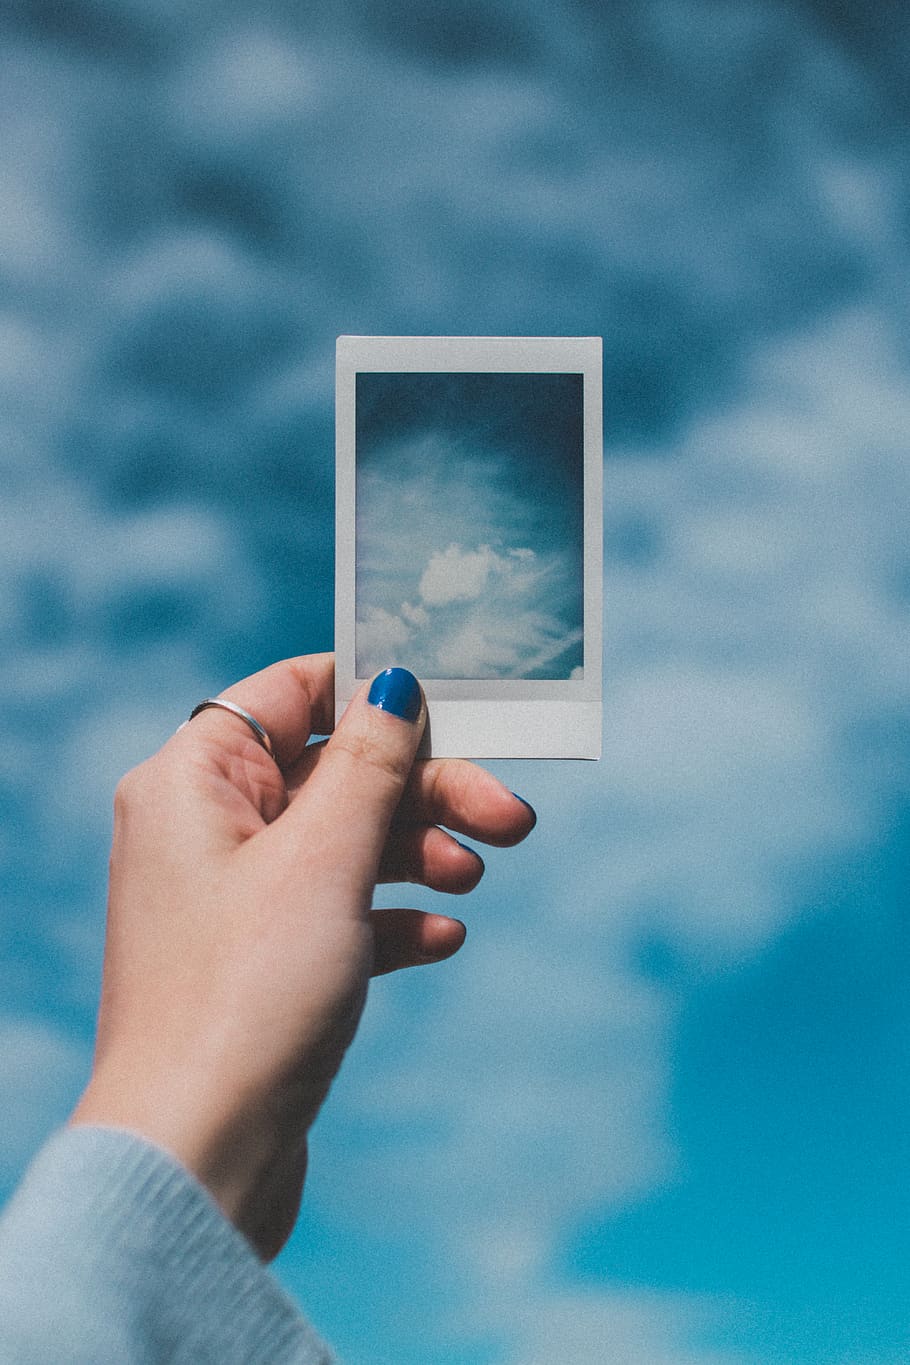 HD wallpaper: Person Holding Cloud Photo, clouds, hand, pill, polaroid, sky